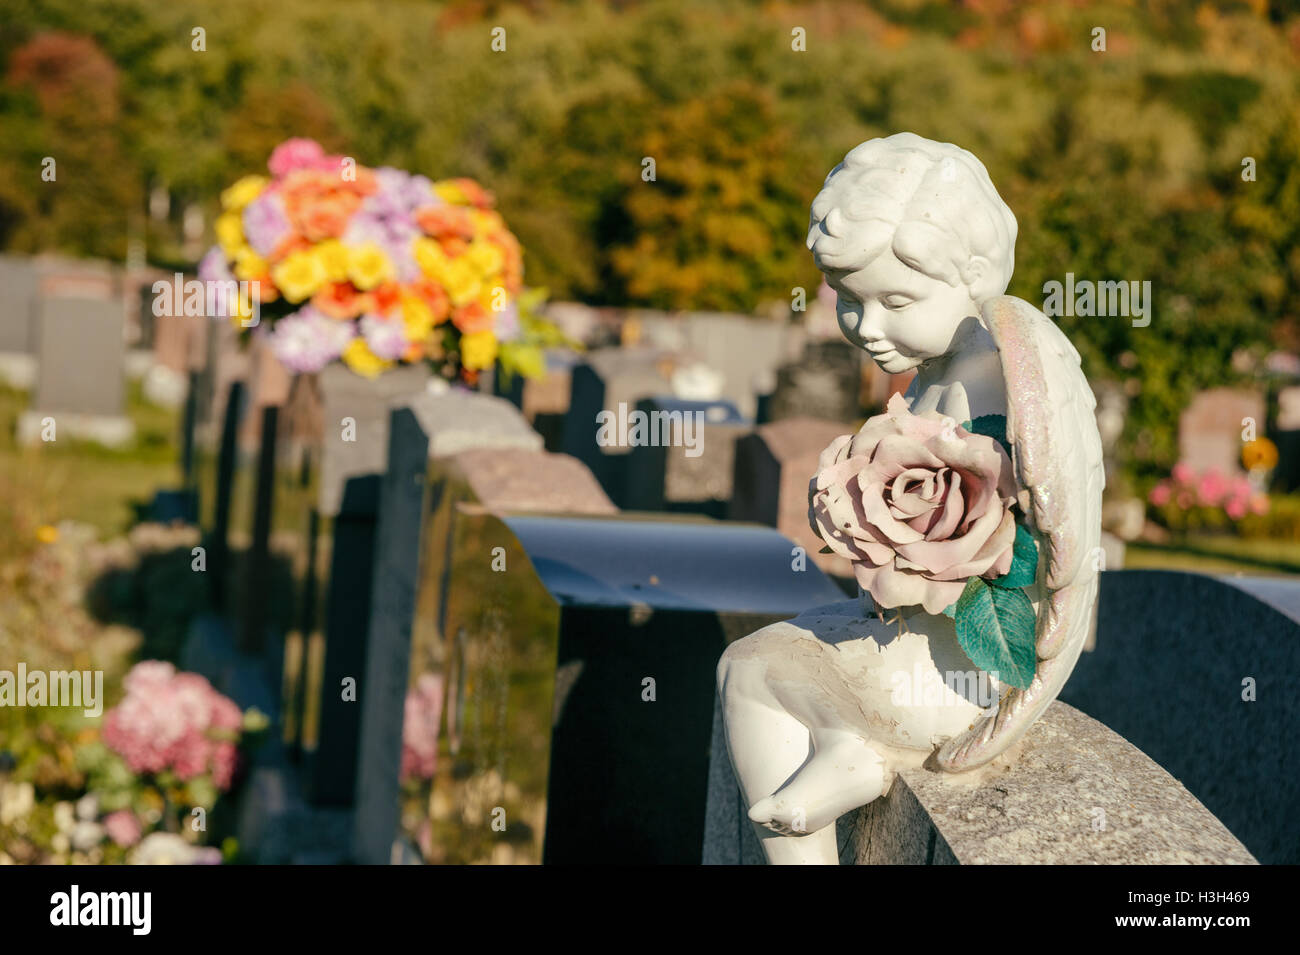 Statue of an angel holding a rose sitting on a tombstone in a cemetery with flowers and headstones in the background Stock Photo